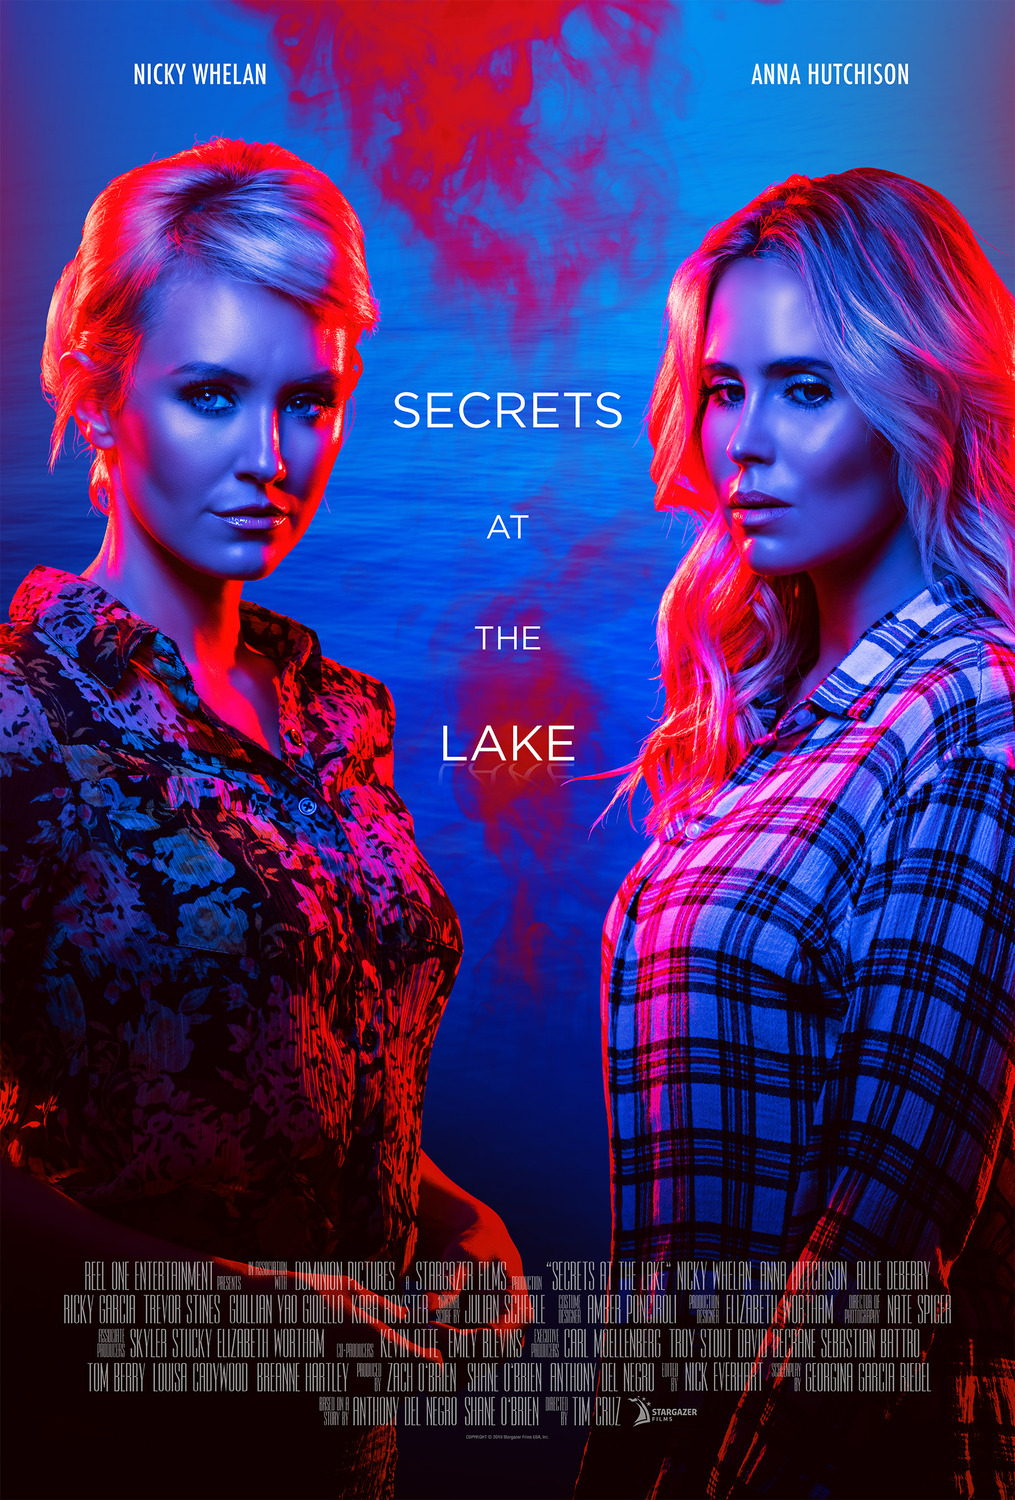 Details about   P407 Secrets at the Lake Movie 14x21 32x48 Art Poster